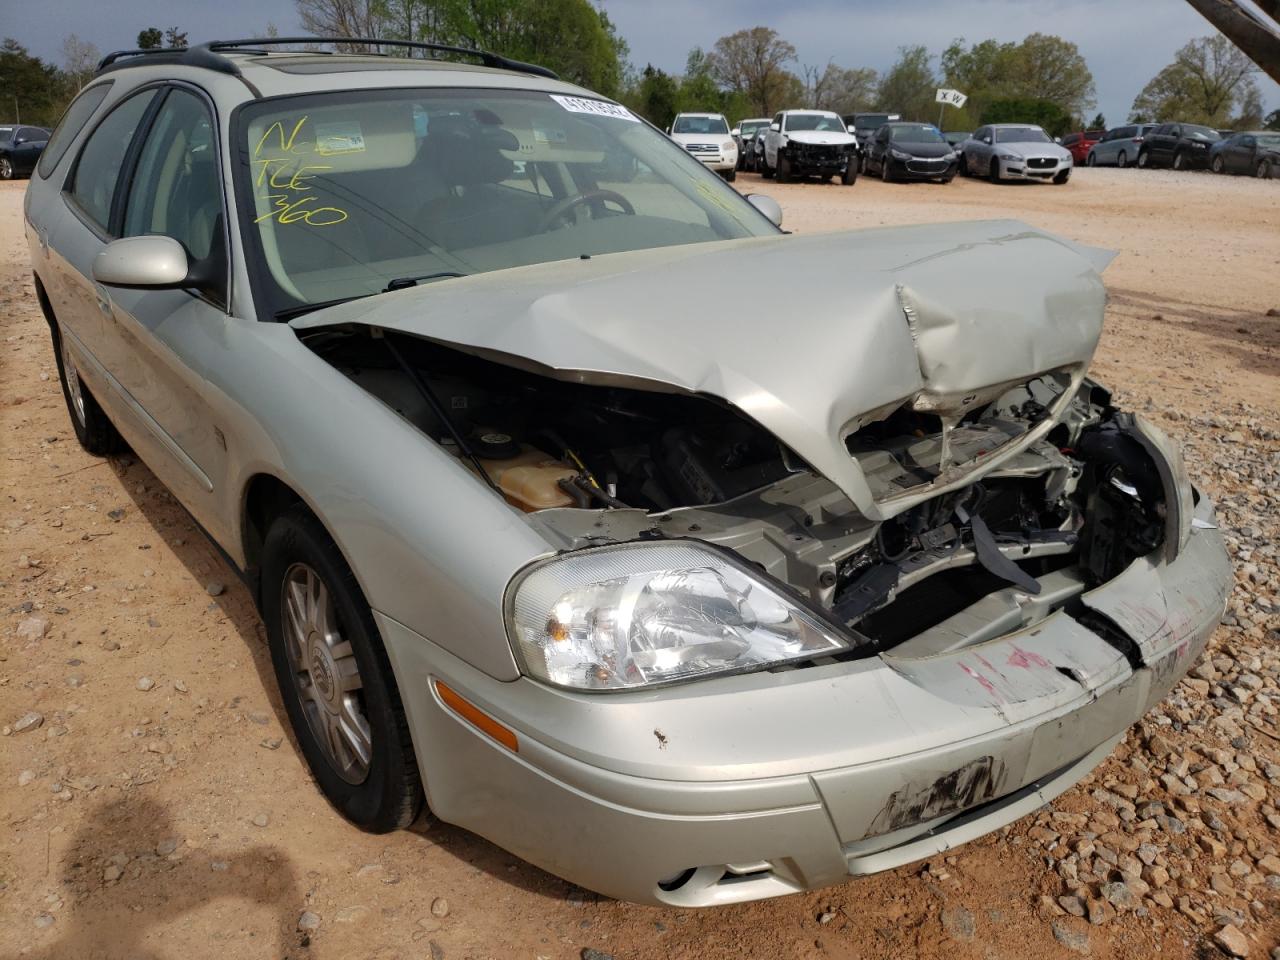 2005 Mercury Sable LS P for sale at Copart China Grove, NC Lot #41819*** |  SalvageReseller.com